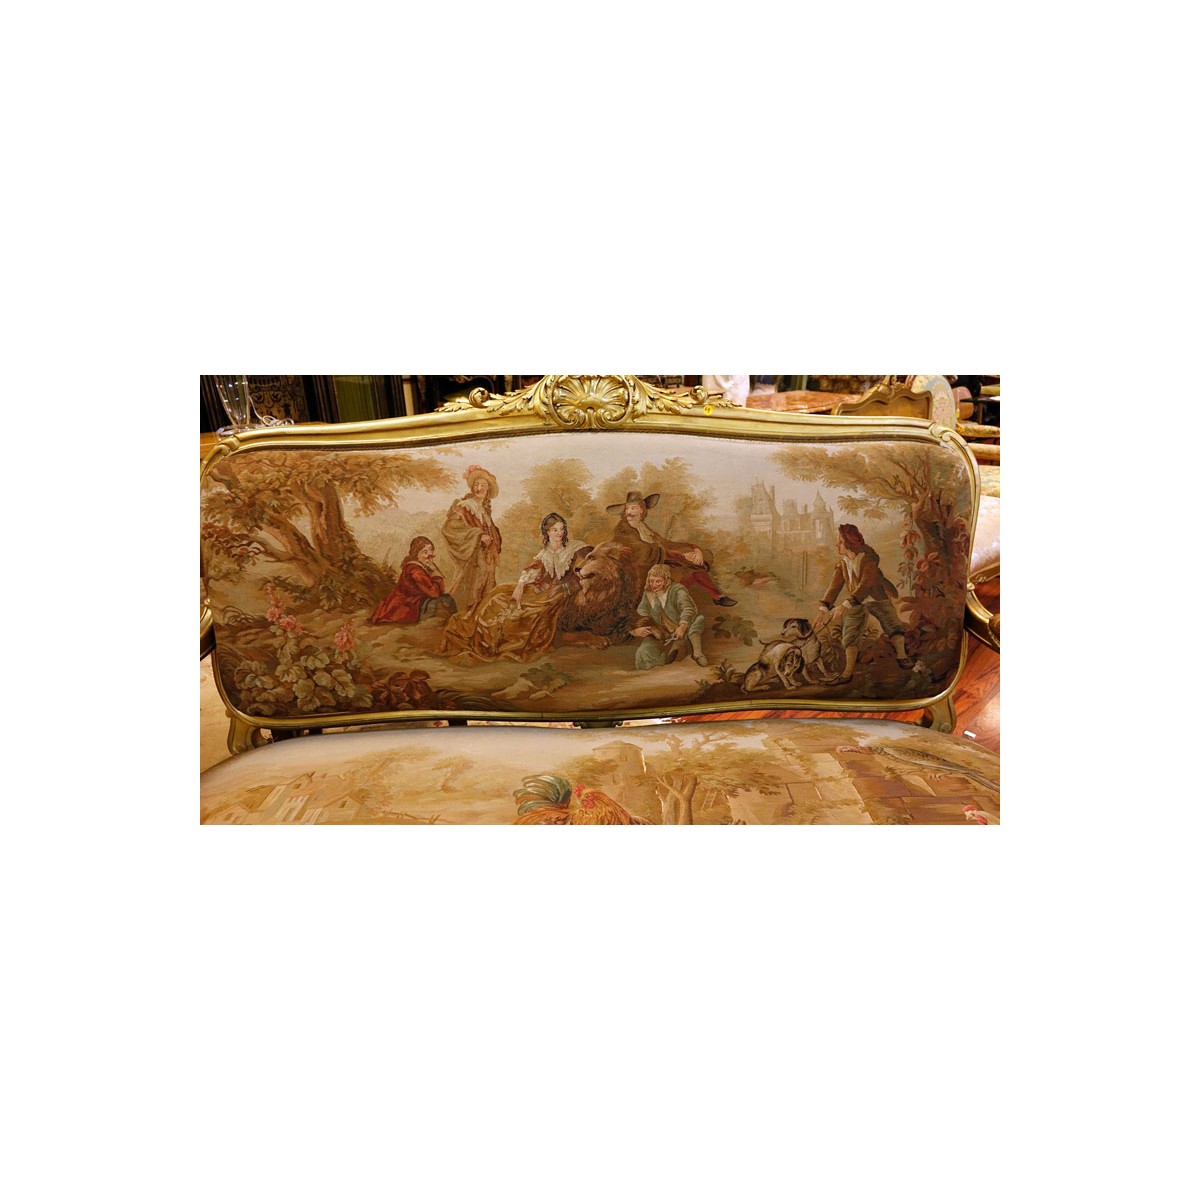 19C Louis XVI Style Carved Giltwood Settee